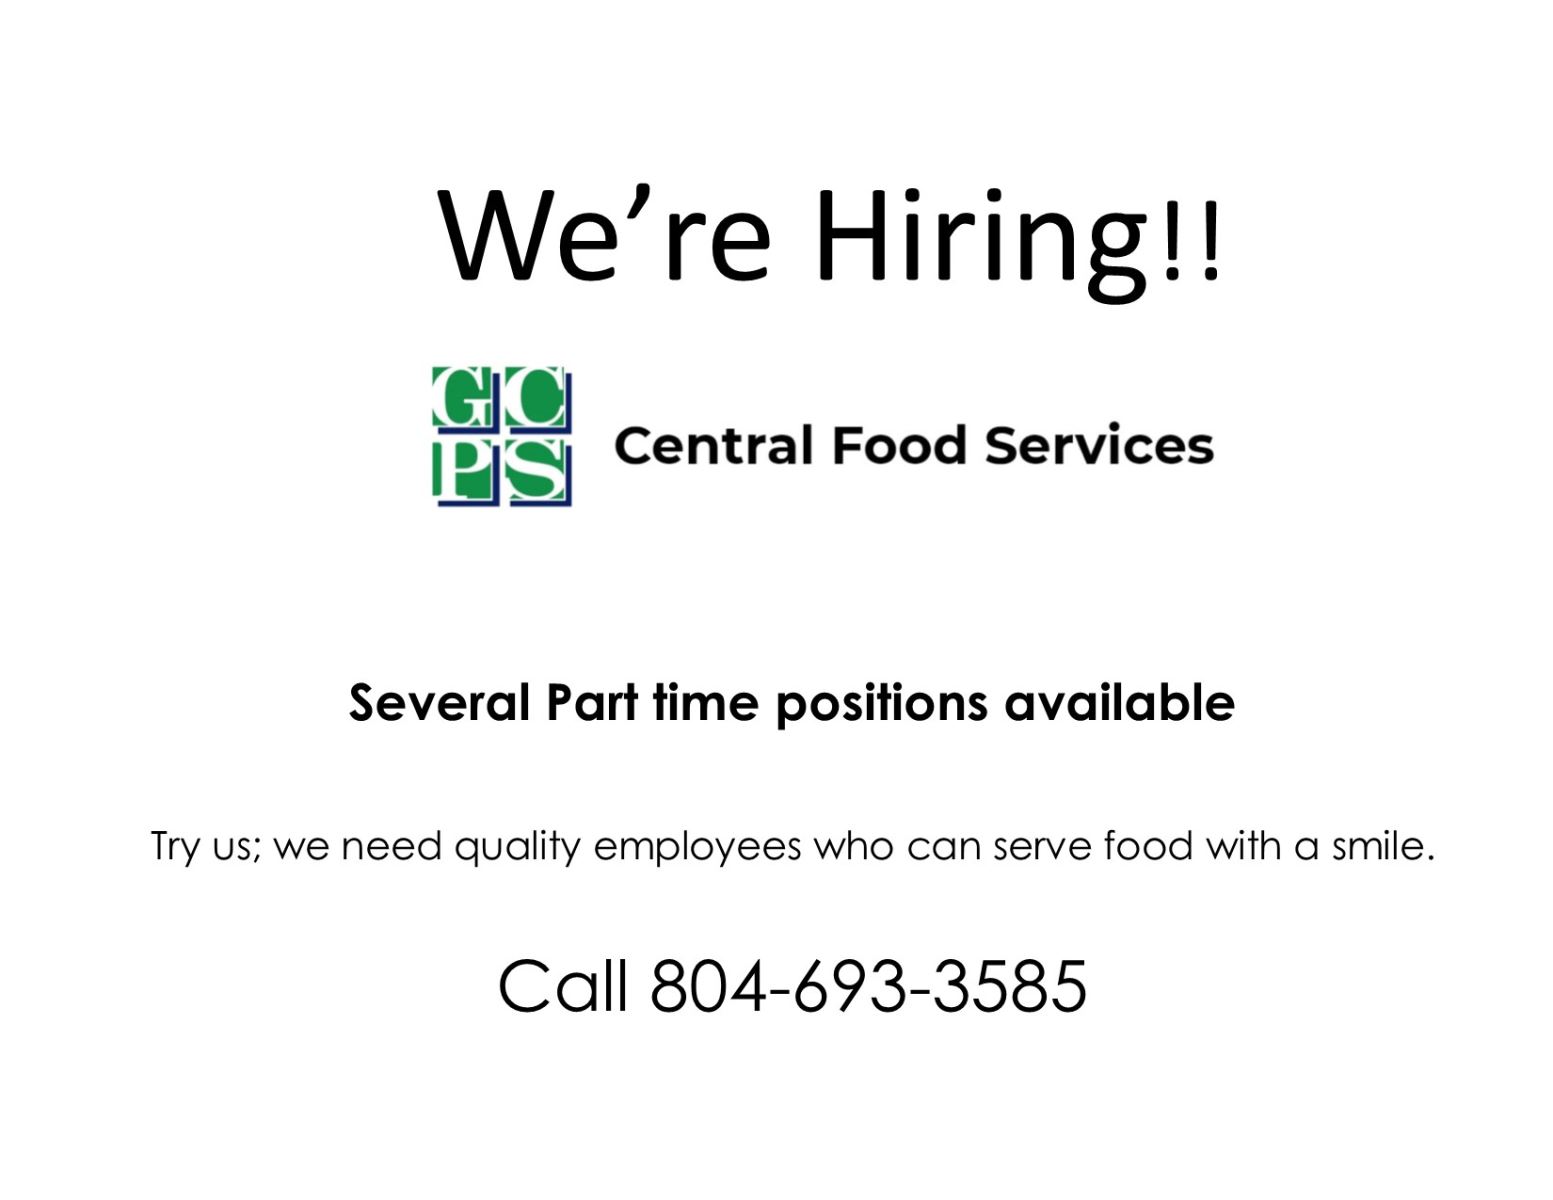 We're Hiring!! GO PS Central Food Services Several Part time positions available Try us; we need quality employees who can serve food with a smile. Call 804-693-3585